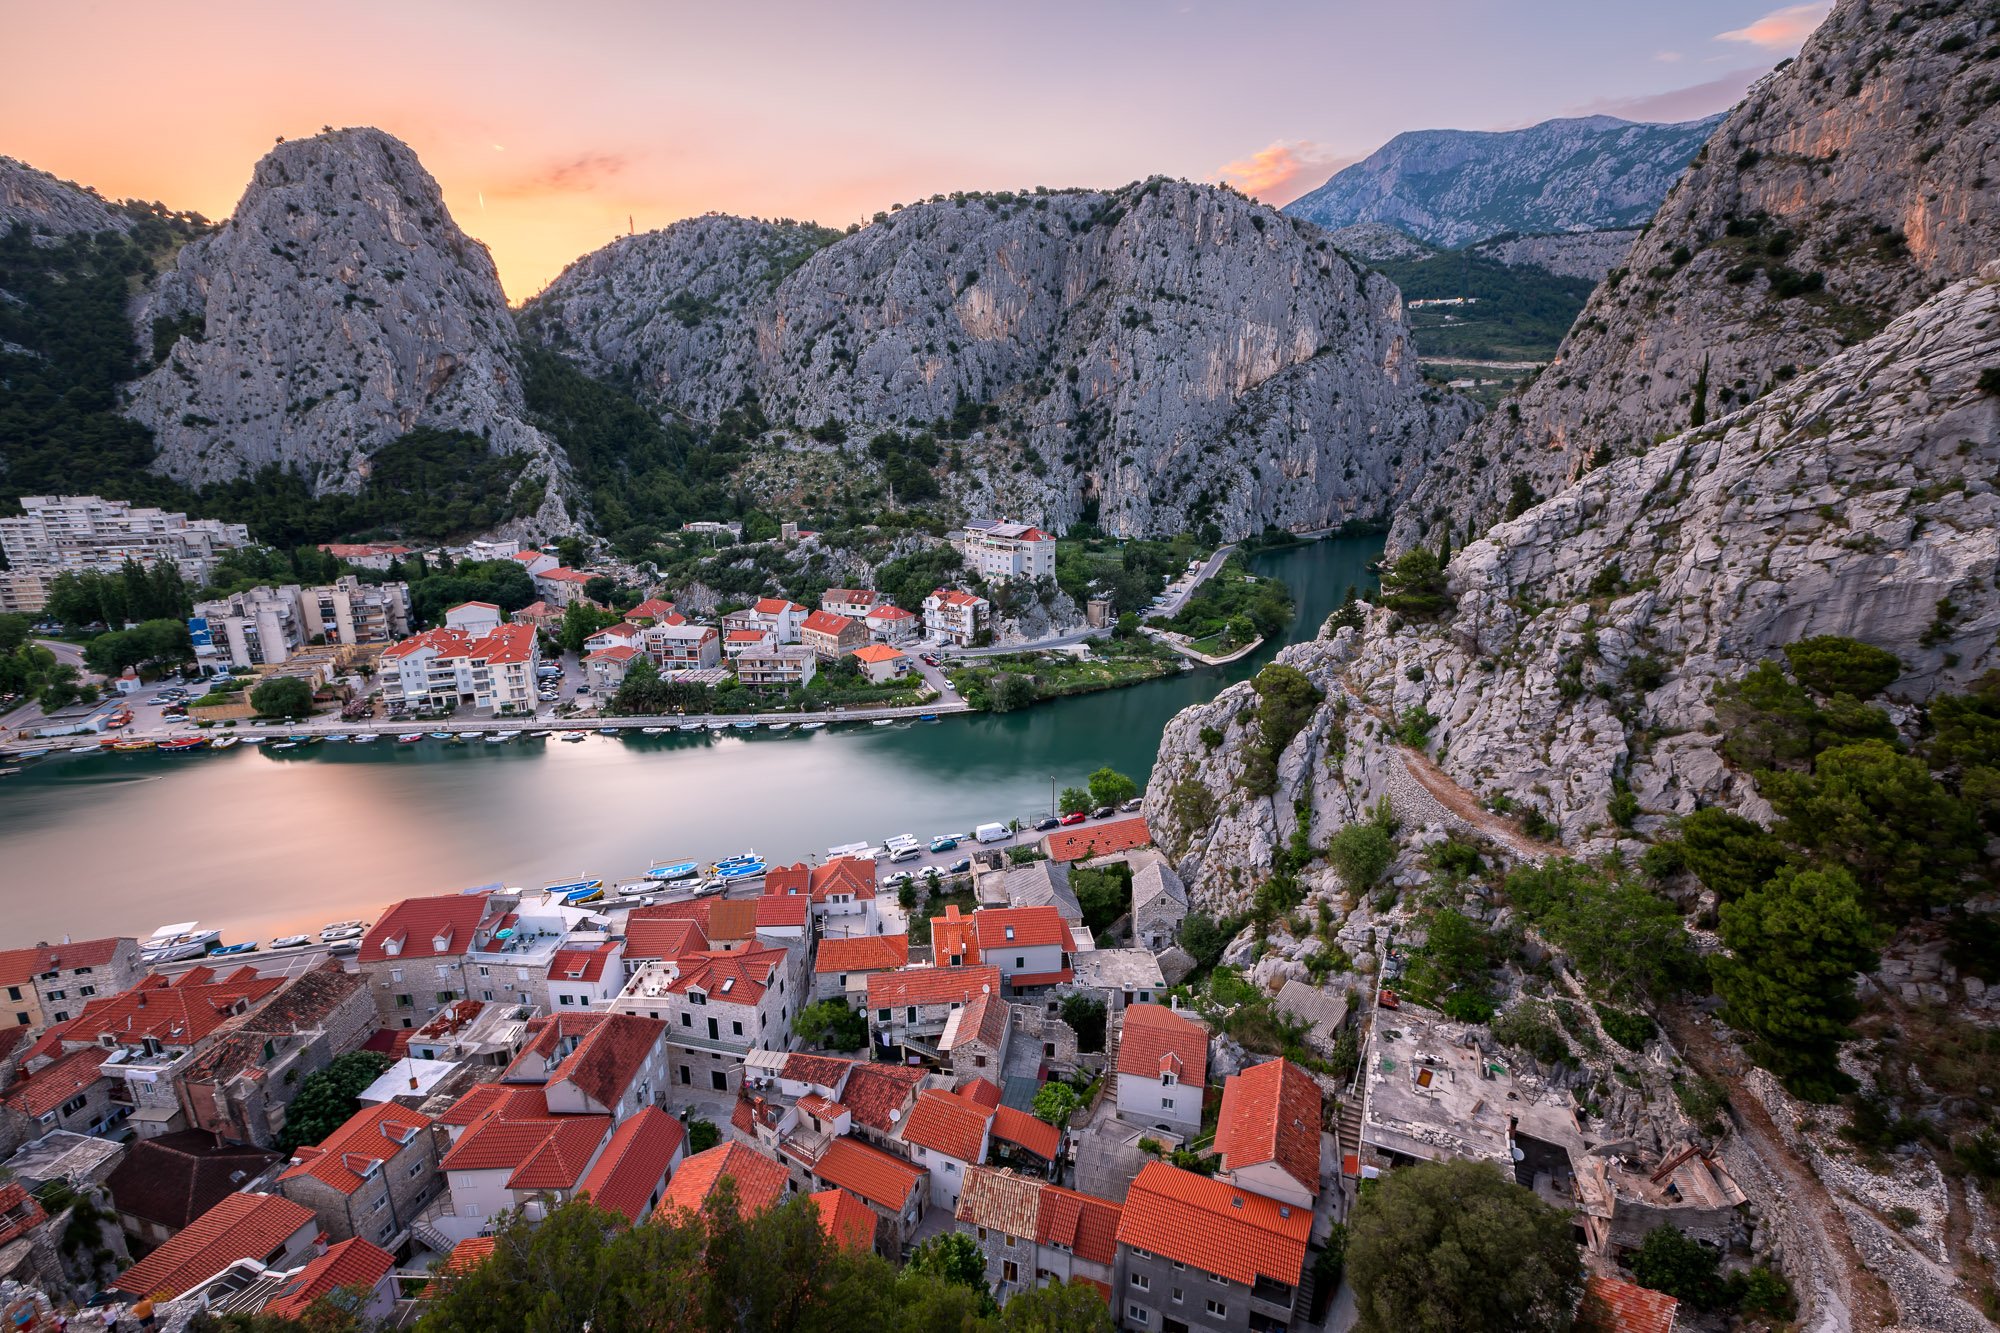 adriatic, architecture, boat, building, canyon, castle, cetina, city, cityscape, cliff, croatia, culture, dalmatia, dusk, europe, evening, fort, gorge, harbor, history, house, lagoon, landmark, landscape, medieval, mediterranean, mountains, old, omis, pin, Andrey Omelyanchuk